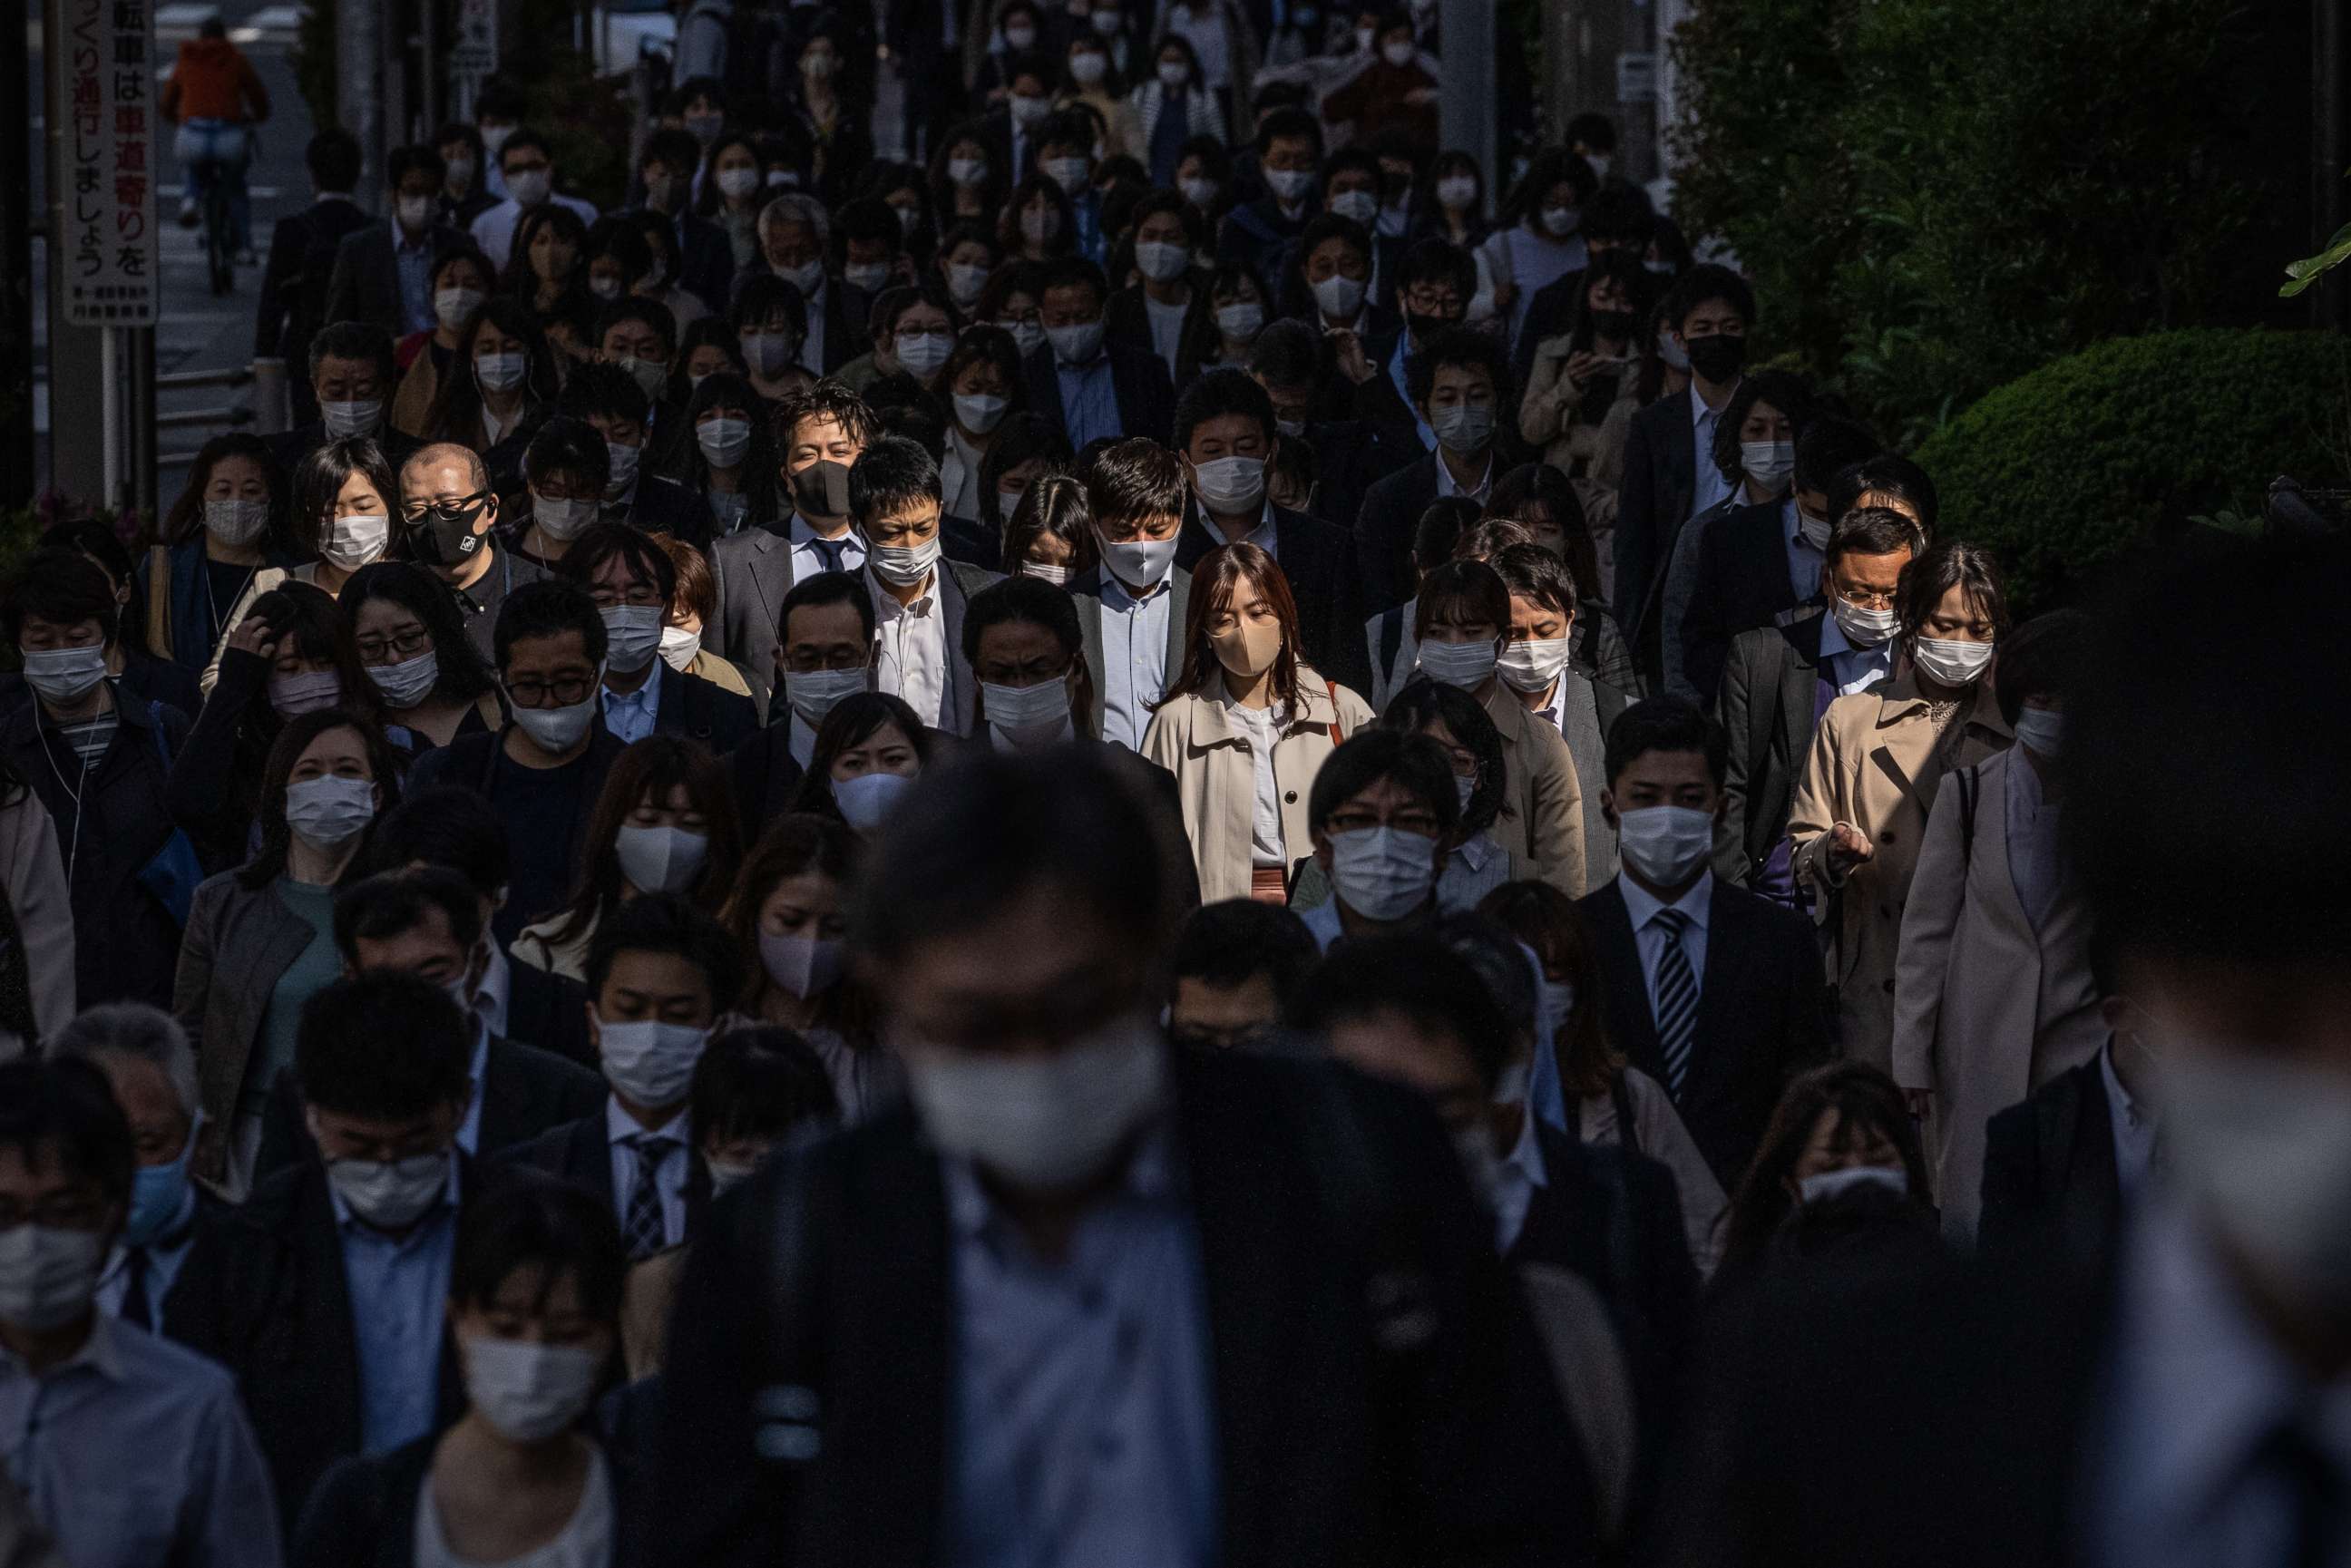 PHOTO: People wearing face masks to protect against COVID-19 walk to work in Tokyo, Japan, on April 23, 2021.